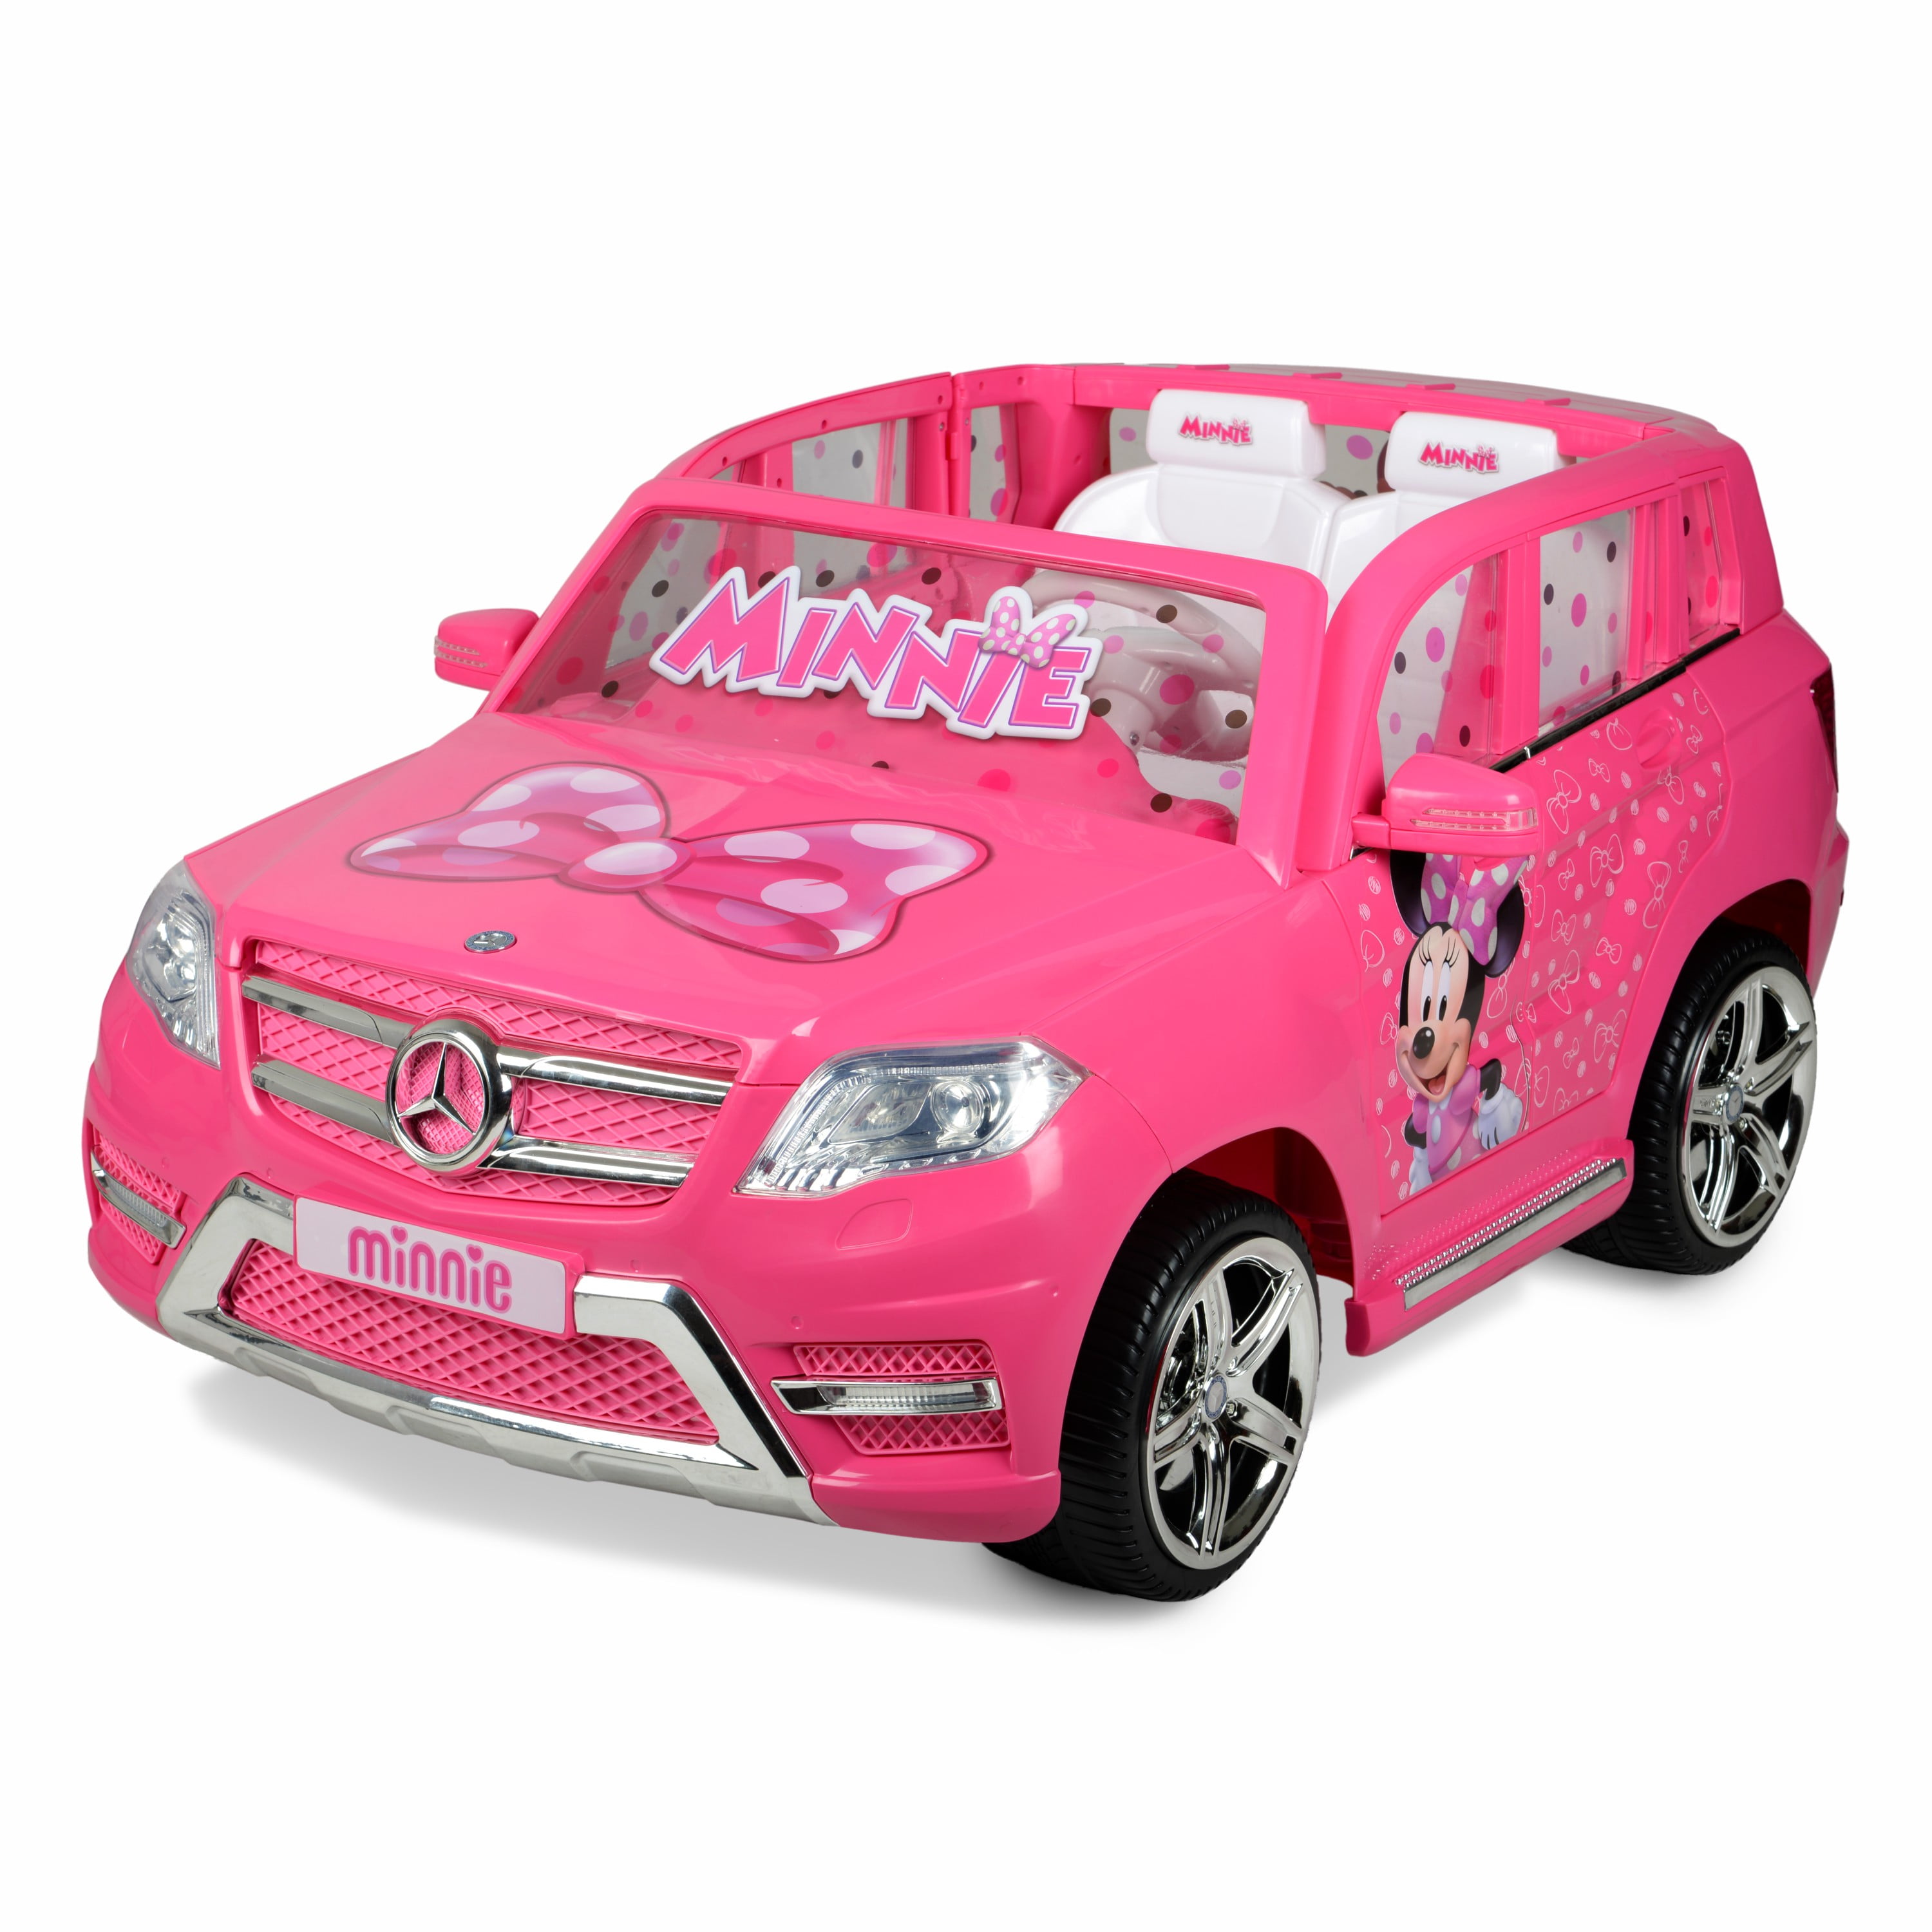 12v minnie mouse mercedes ride on